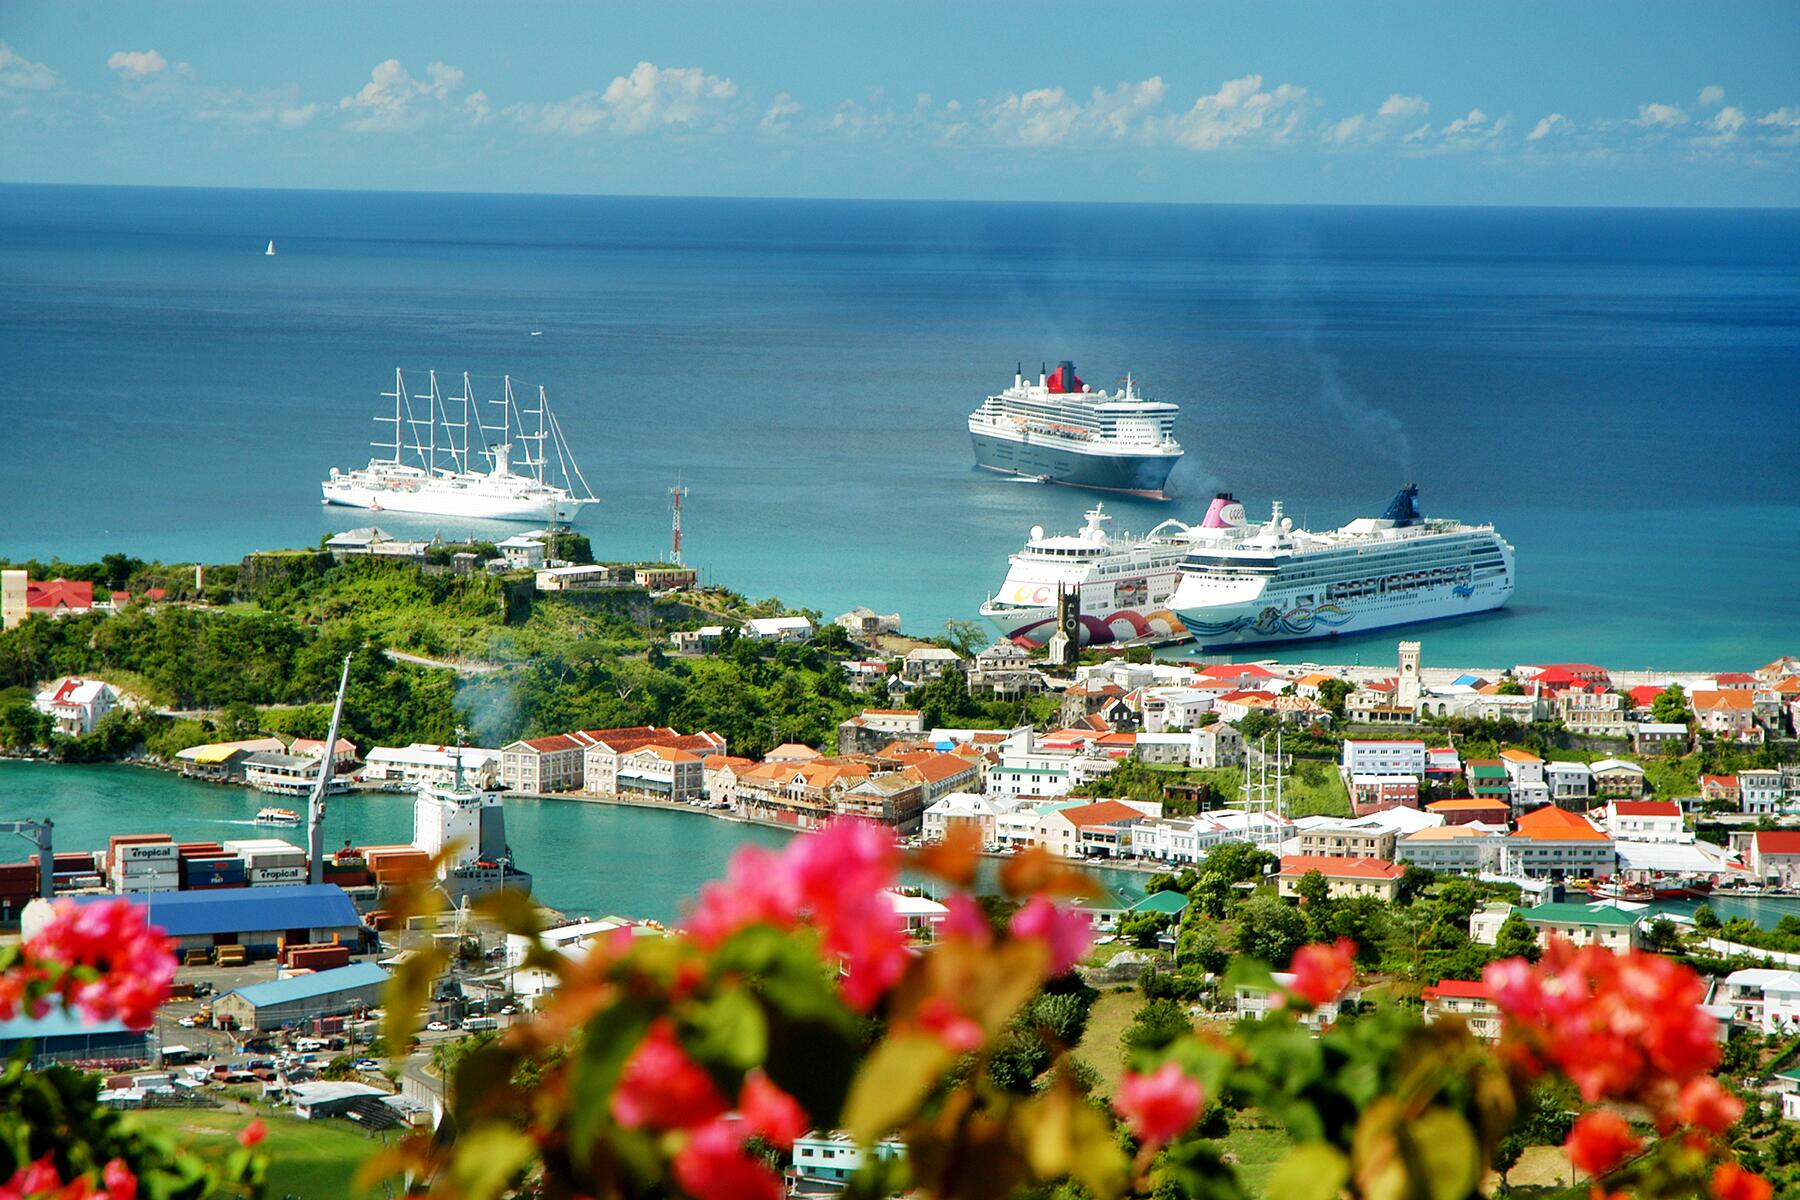 southern caribbean cruise ports of call